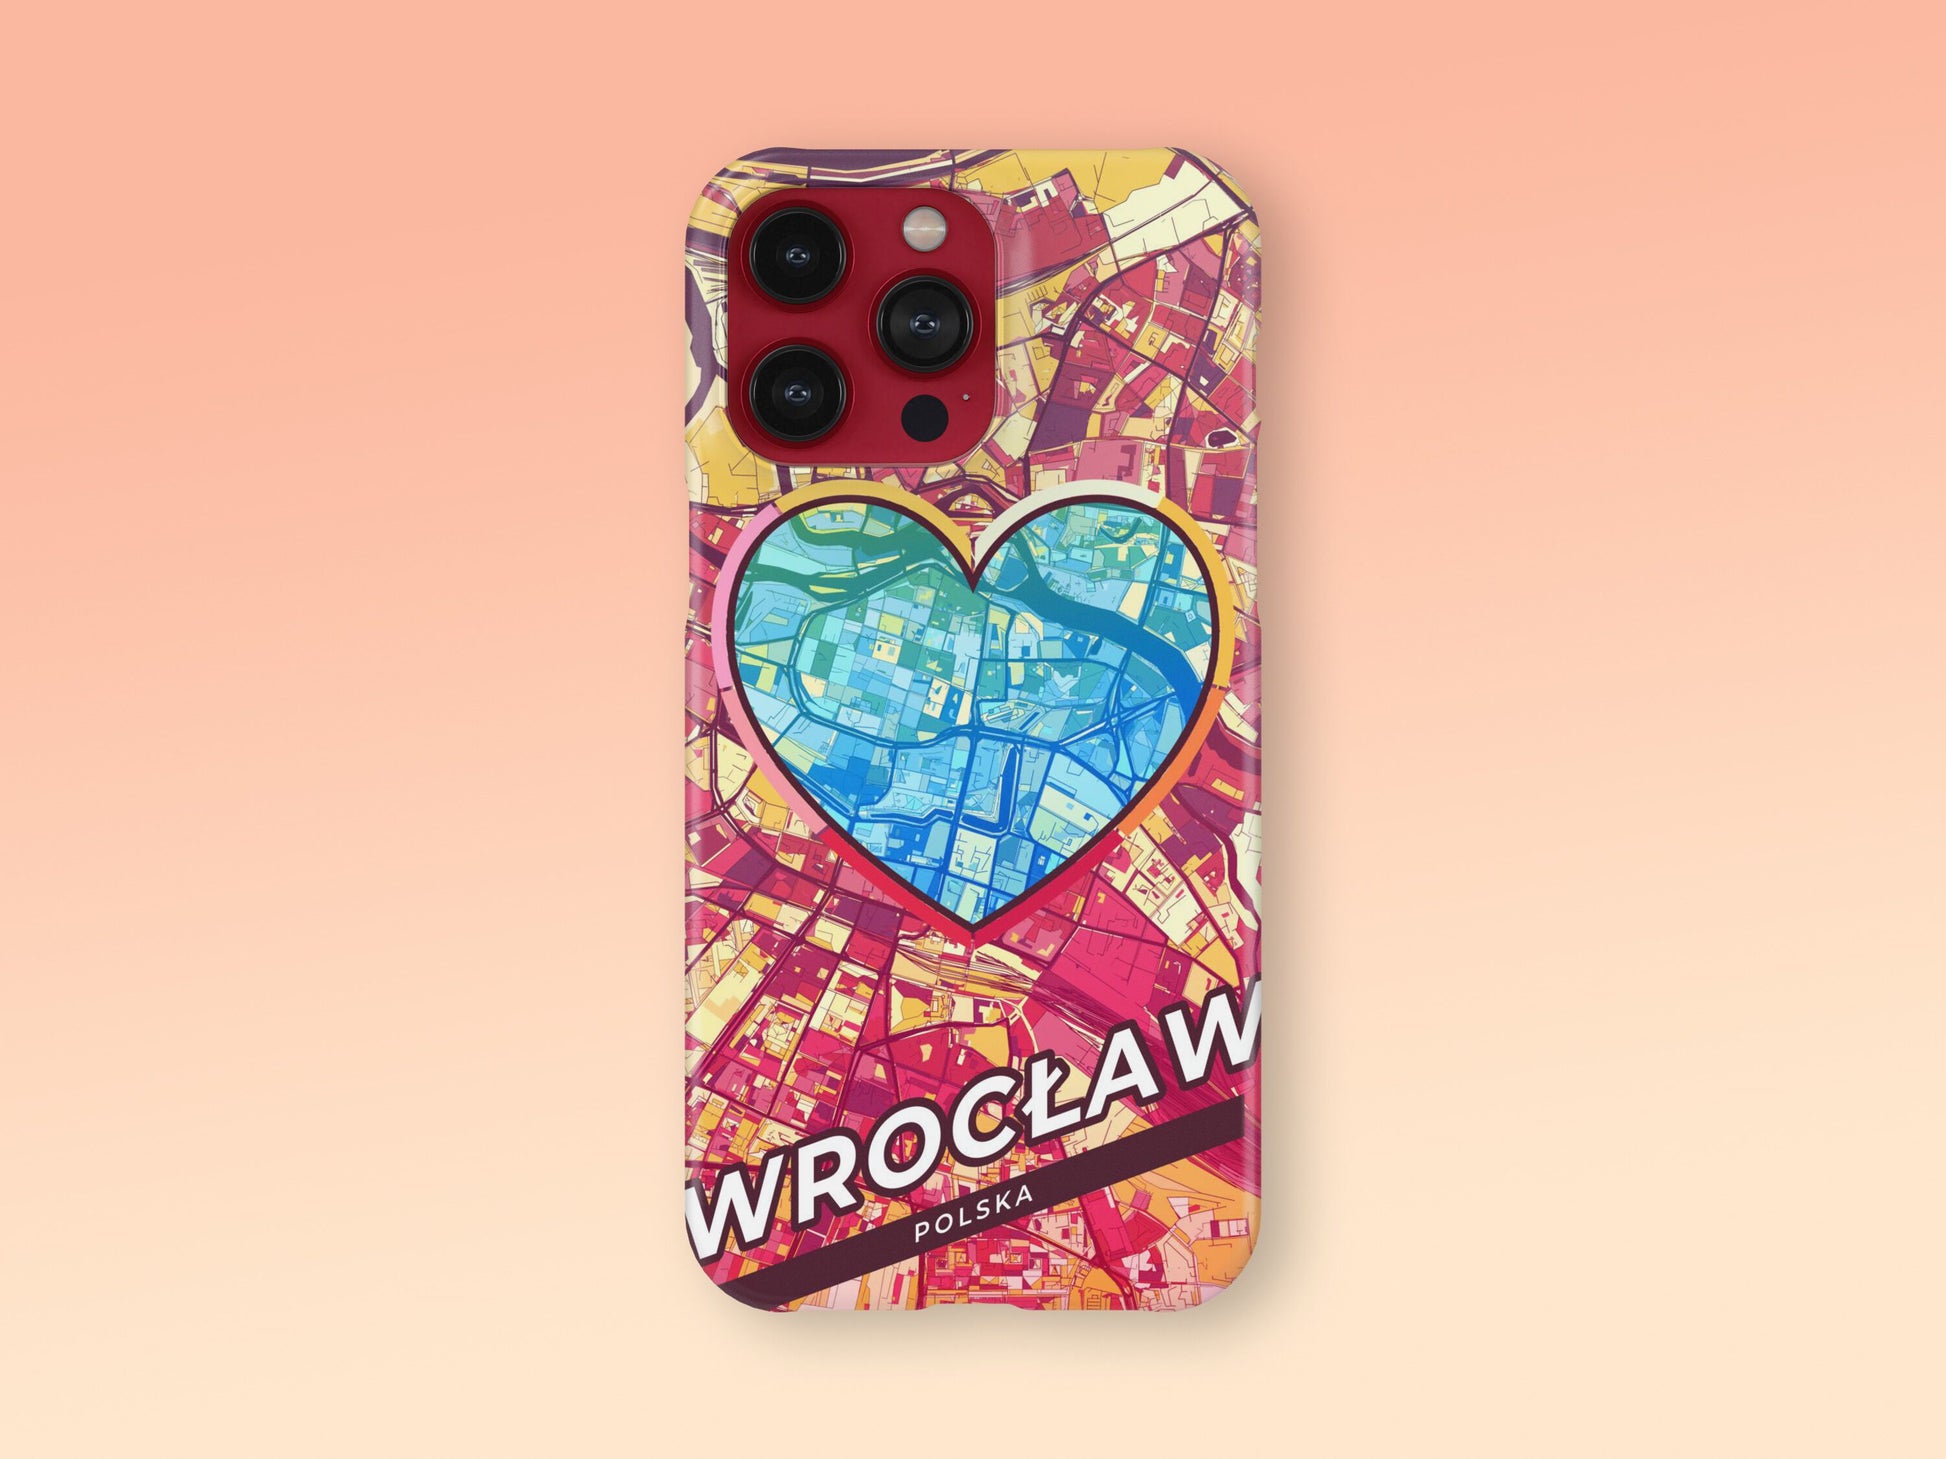 Wrocław Poland slim phone case with colorful icon 2